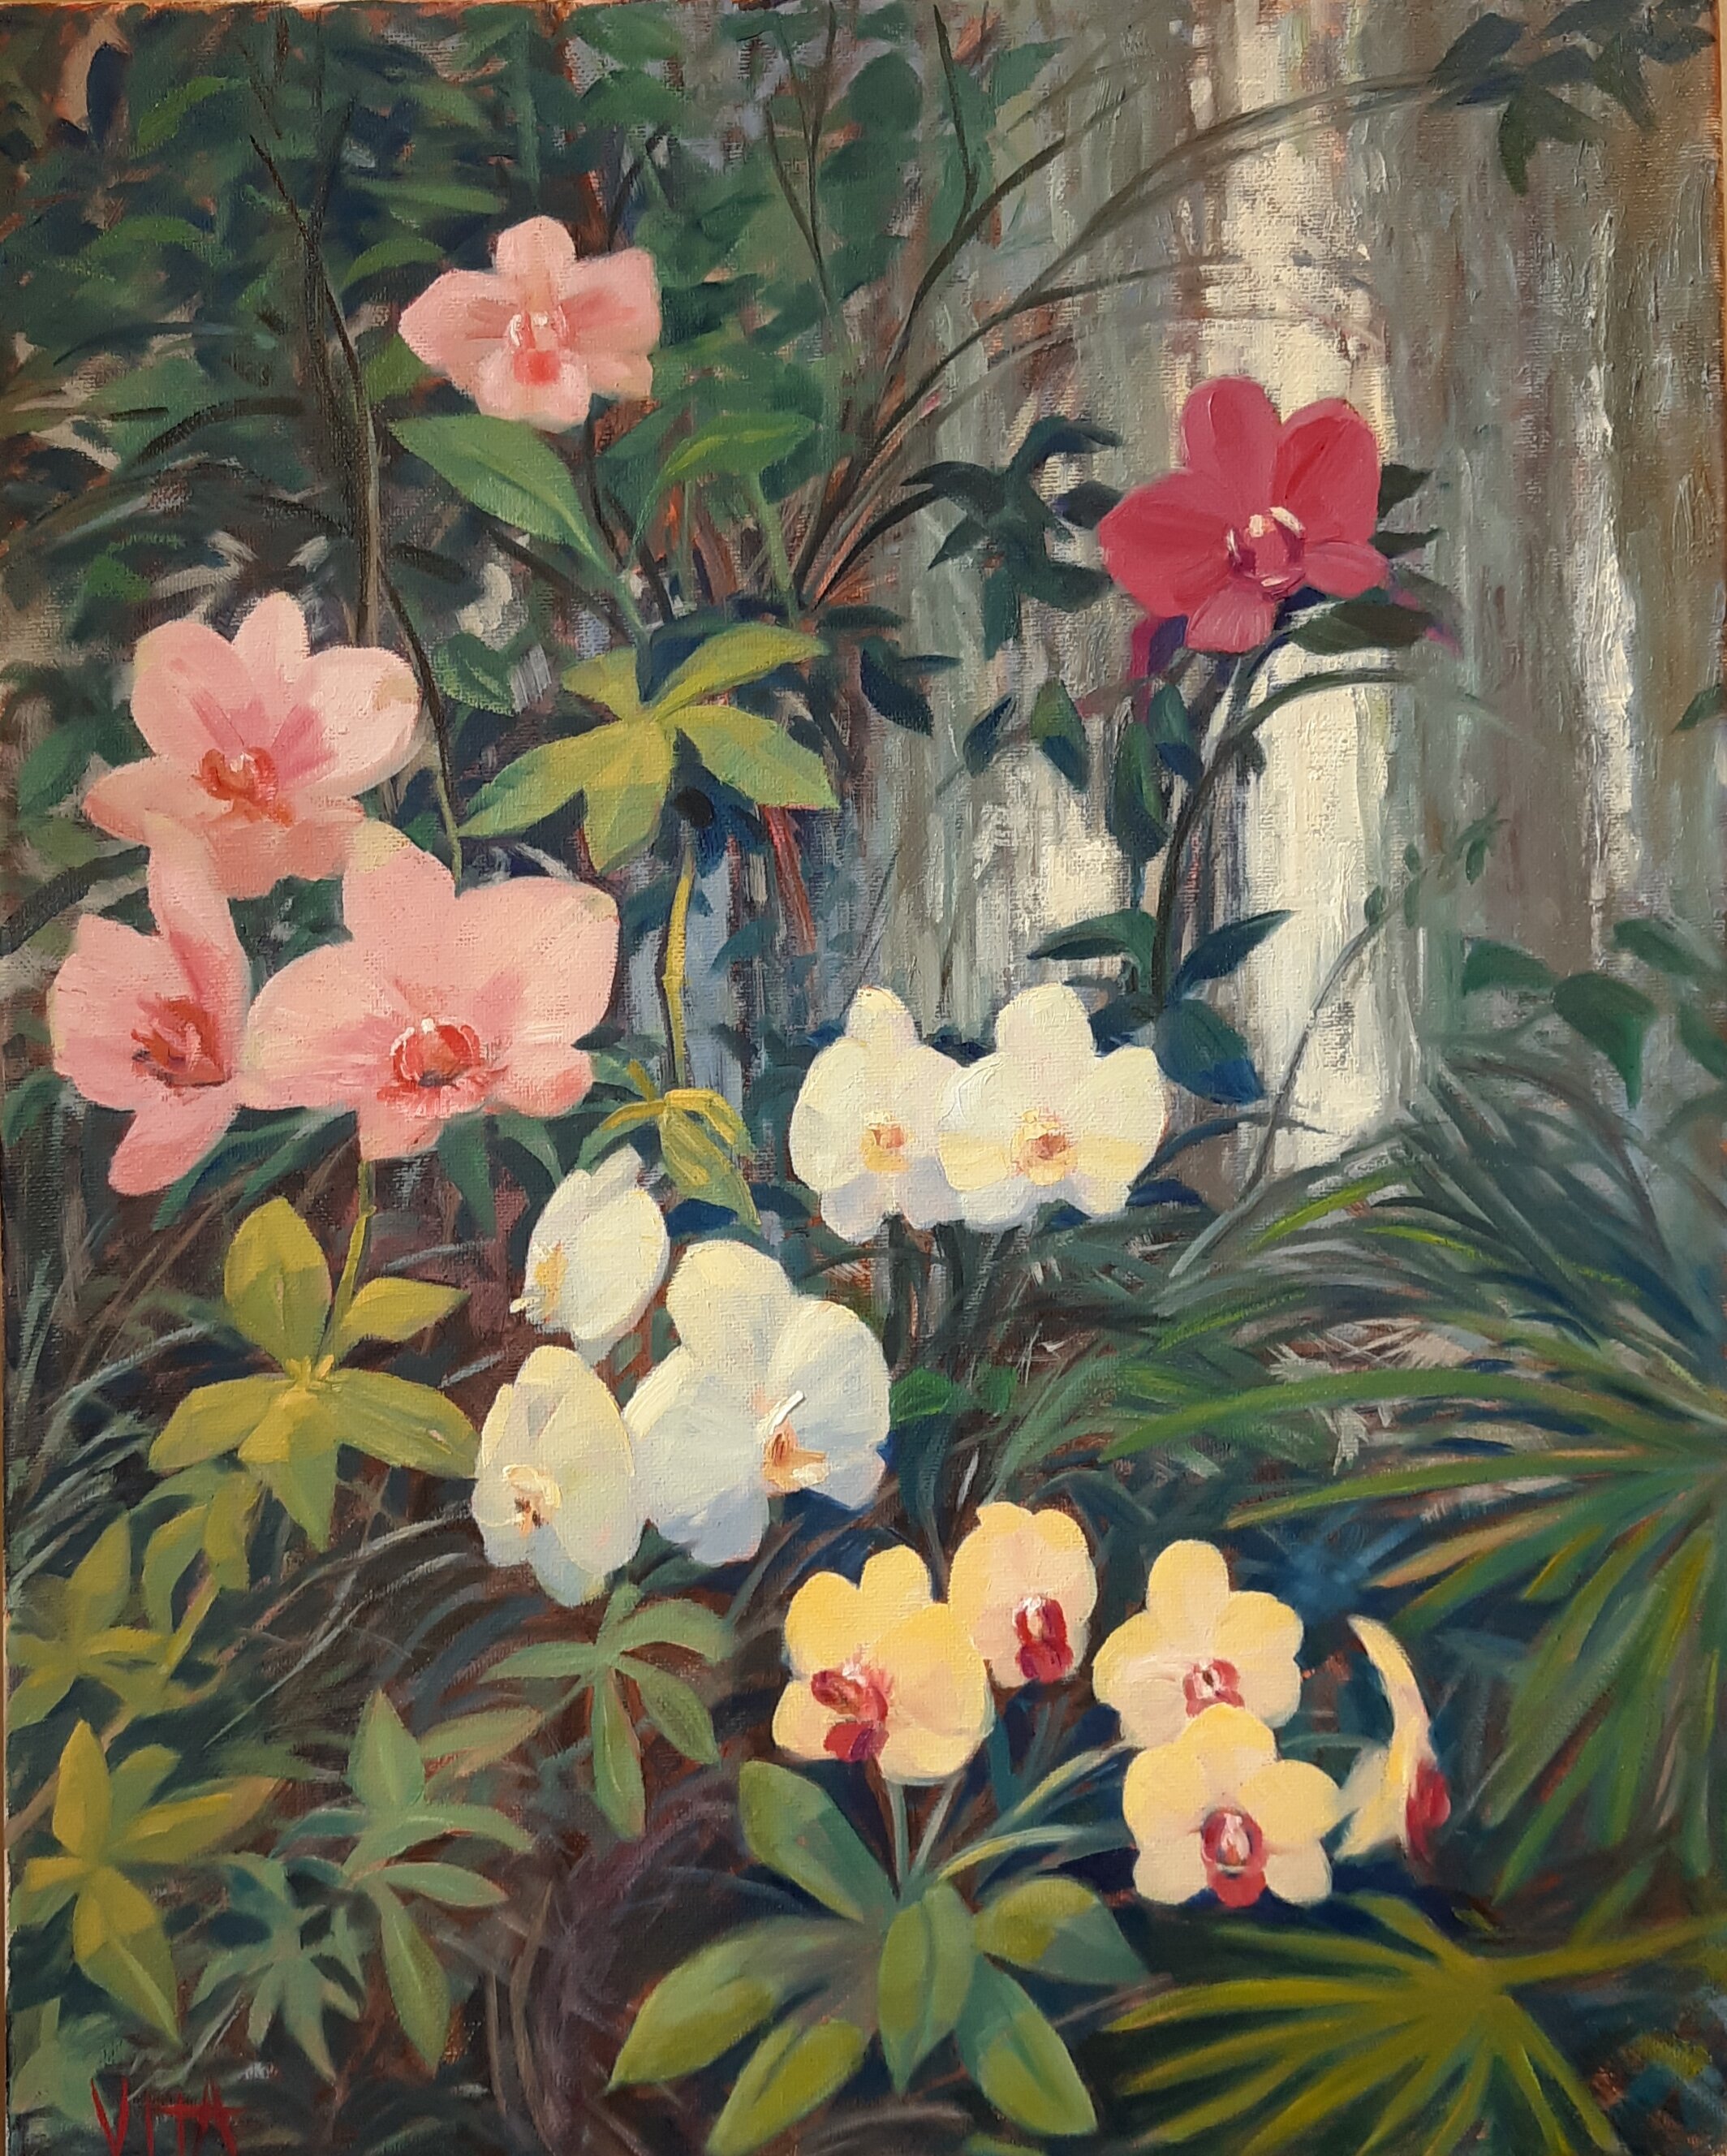 SOLD, Orchid Commission Painting, Oil on Canvas, Copyright 2020 Hirschten